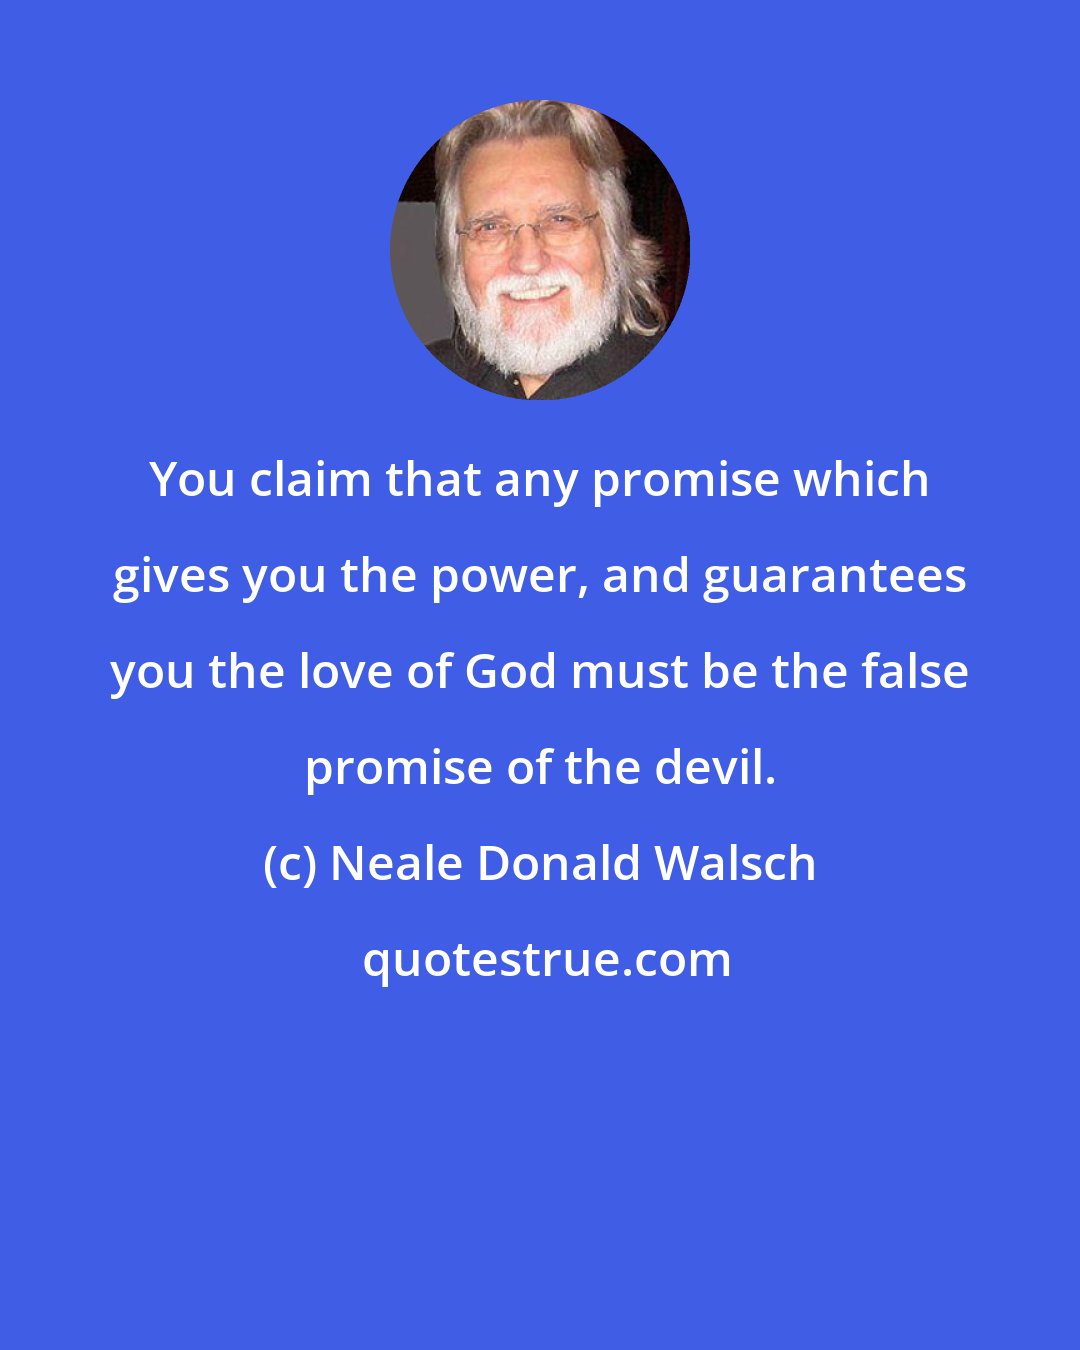 Neale Donald Walsch: You claim that any promise which gives you the power, and guarantees you the love of God must be the false promise of the devil.